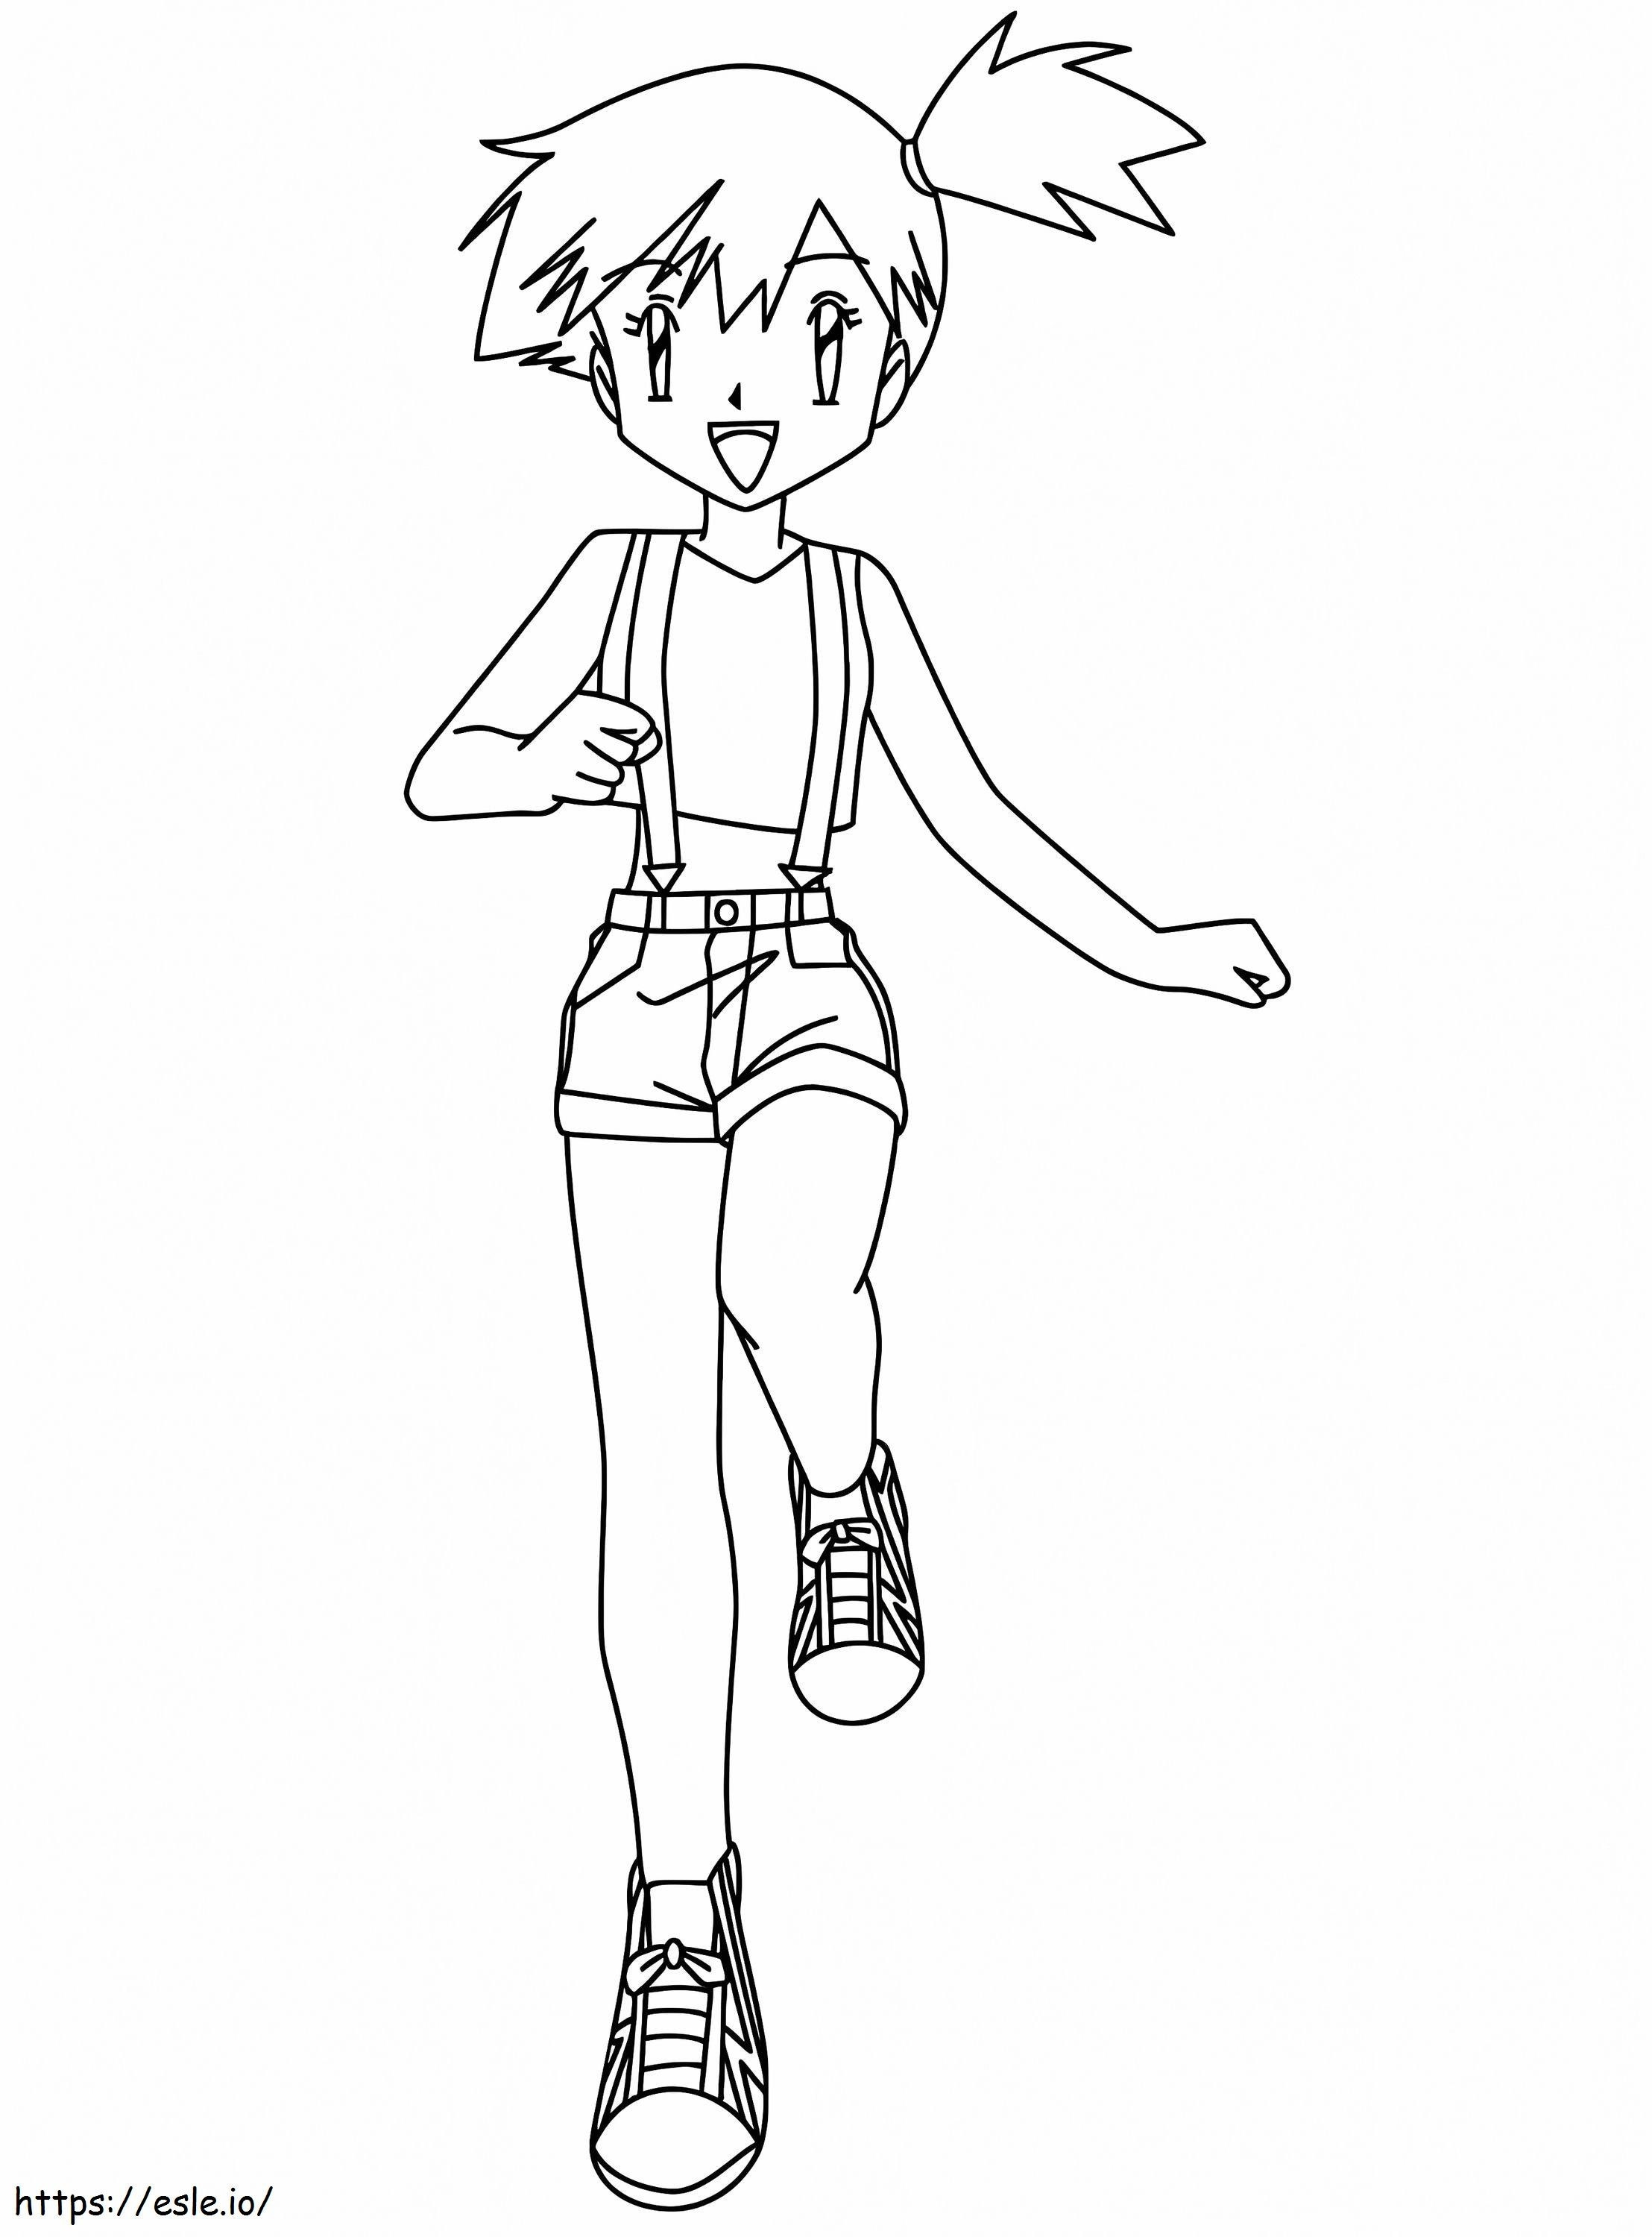 Misty Pokemon Gym Leader coloring page